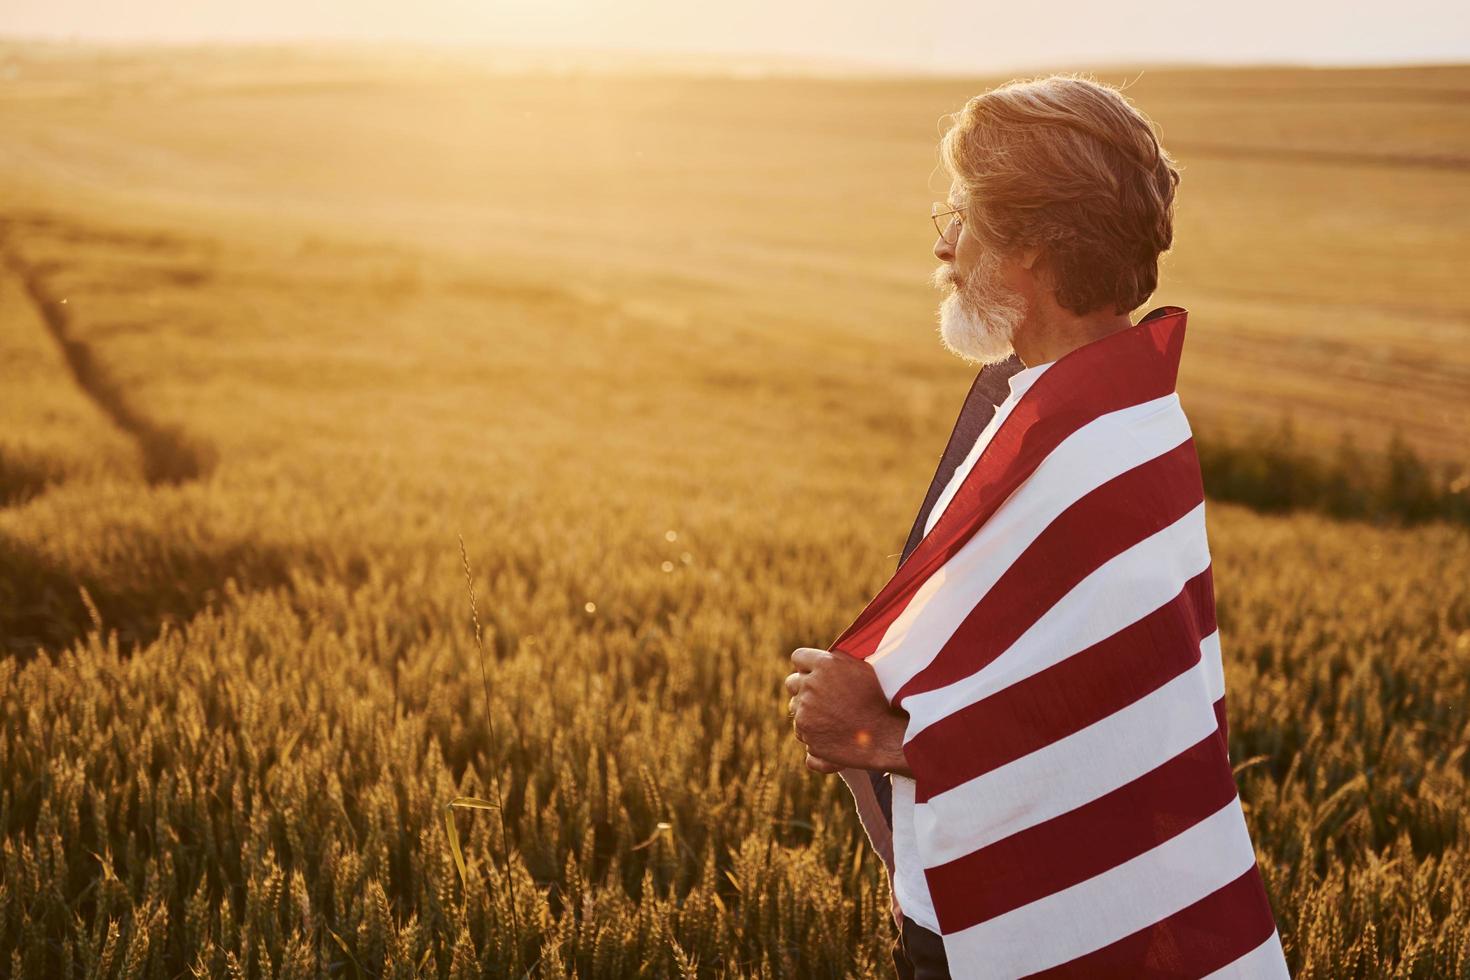 View from behind. Holding USA flag in hands. Patriotic senior stylish man with grey hair and beard on the agricultural field photo